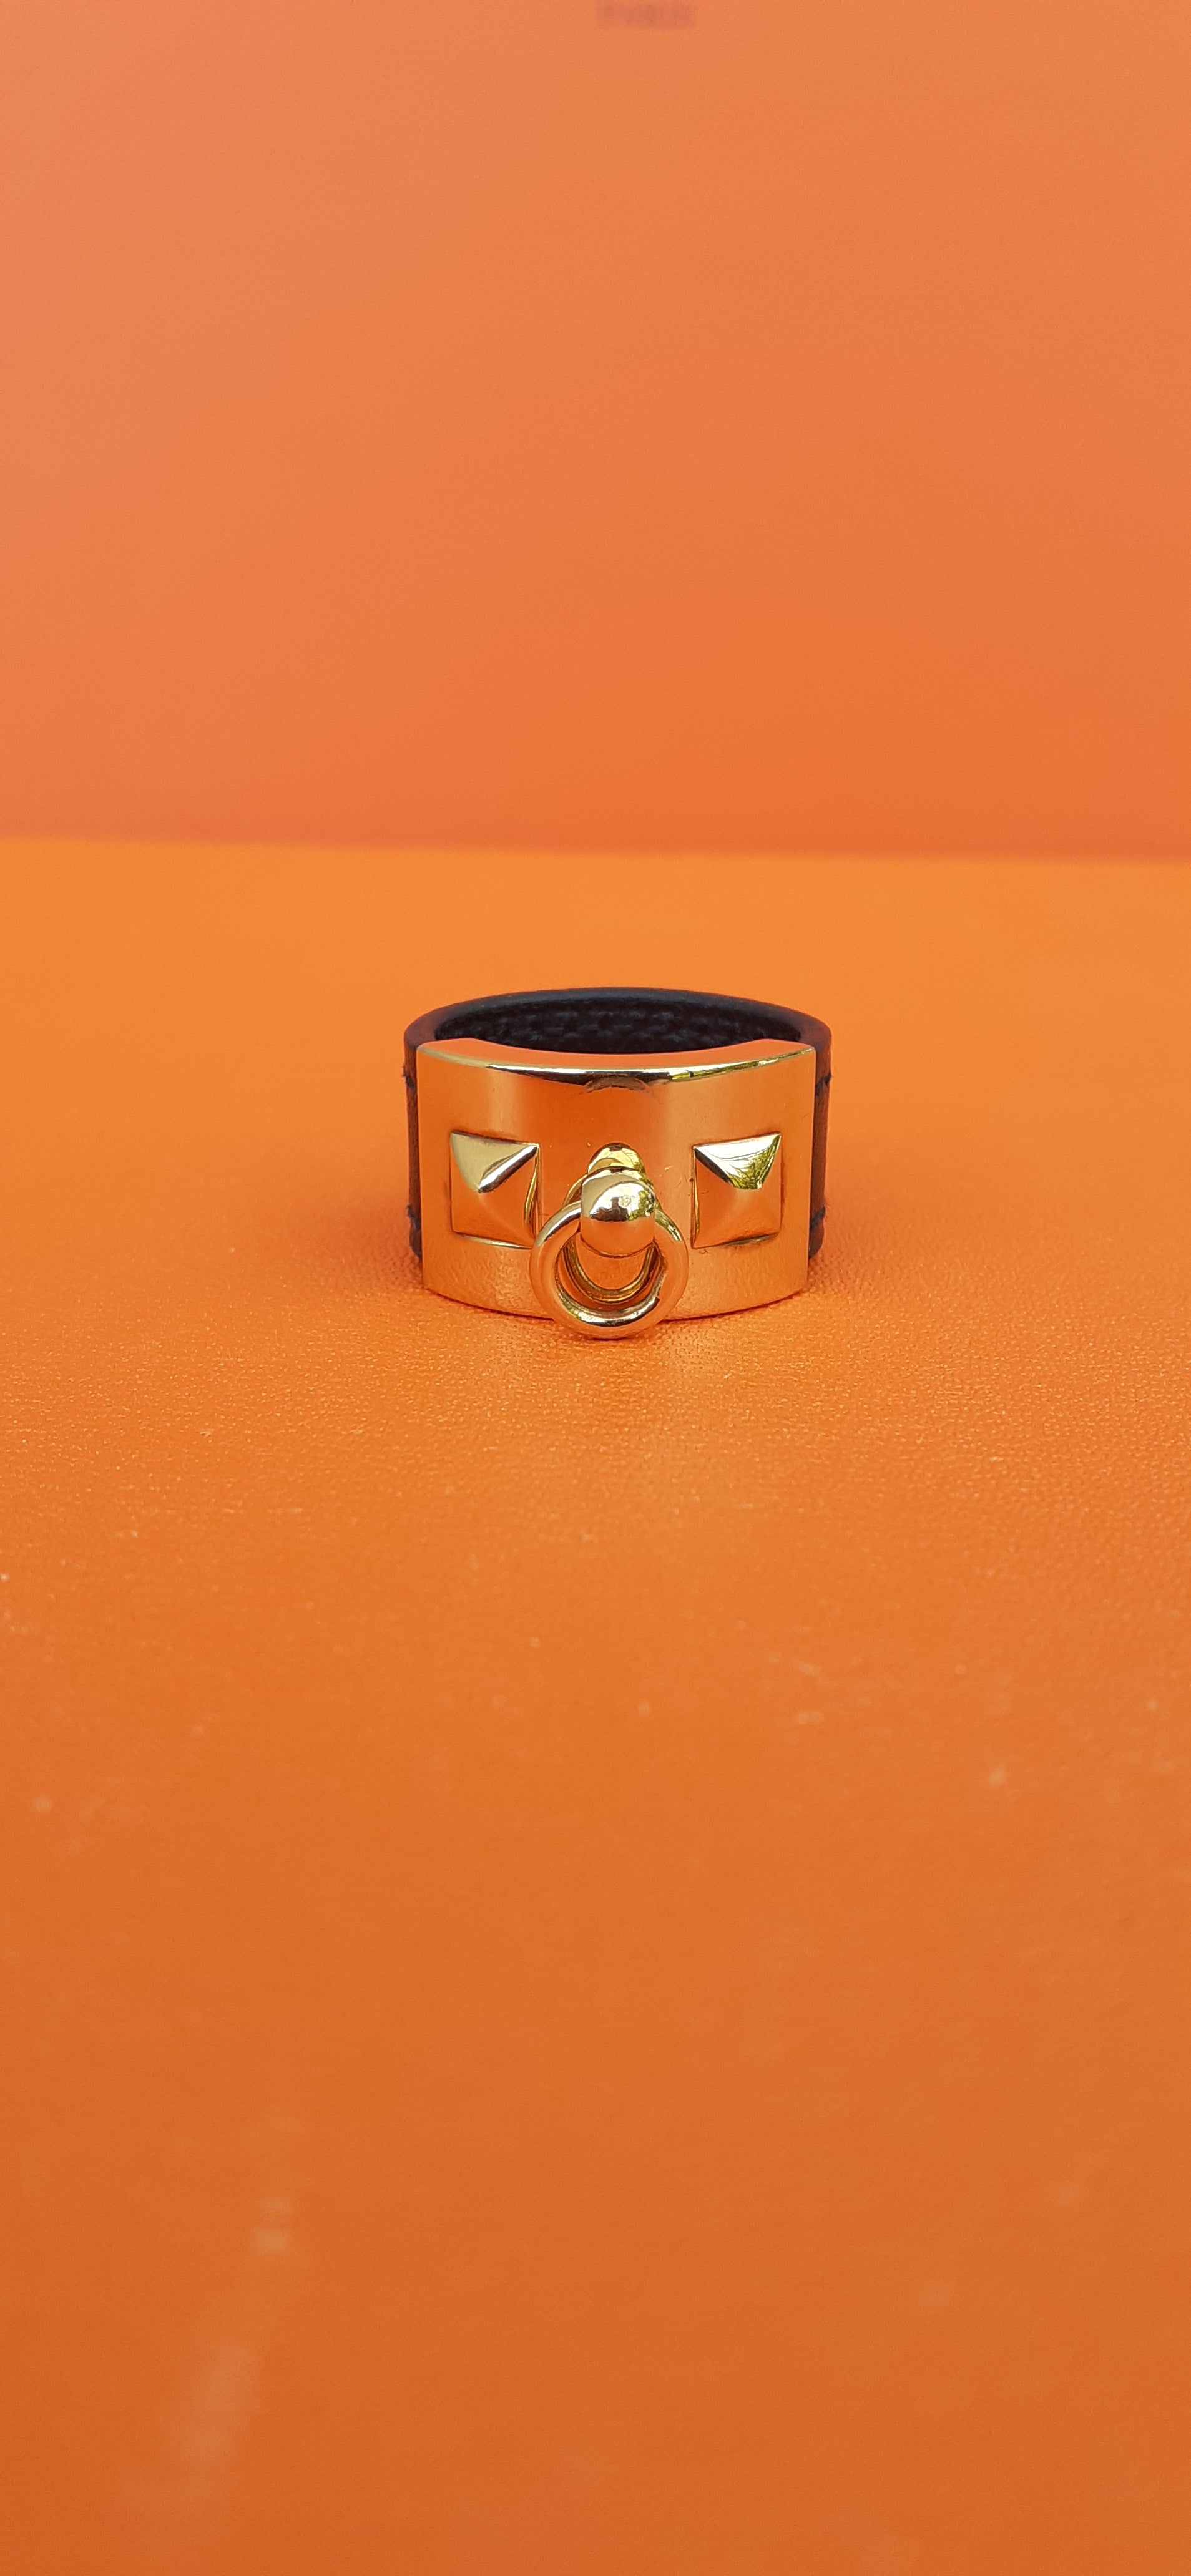 Rare and Beautiful Authentic Hermès Ring

Called 